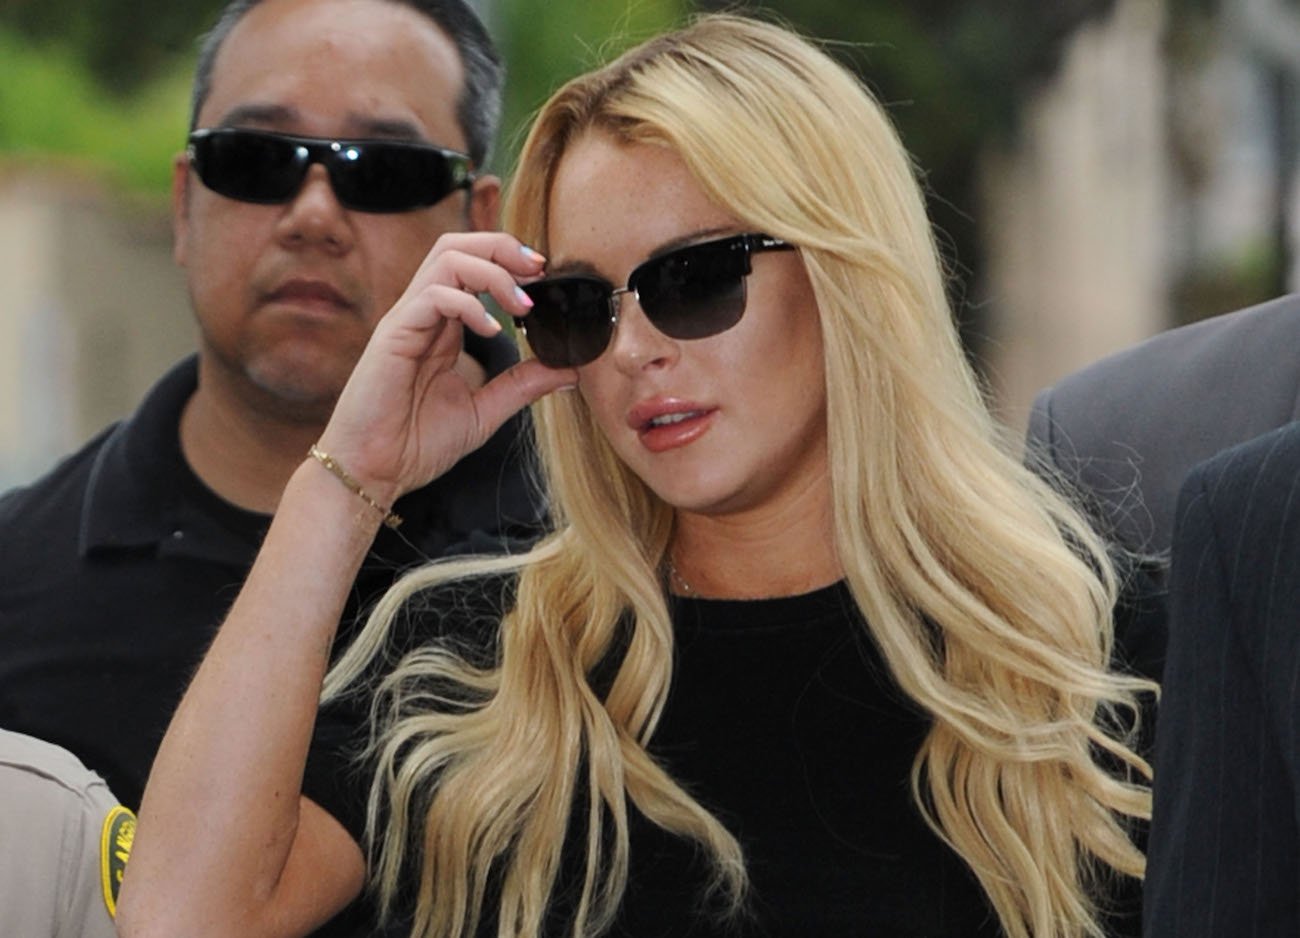 Lindsay Lohan with blond hair and wearing a dark sunglasses